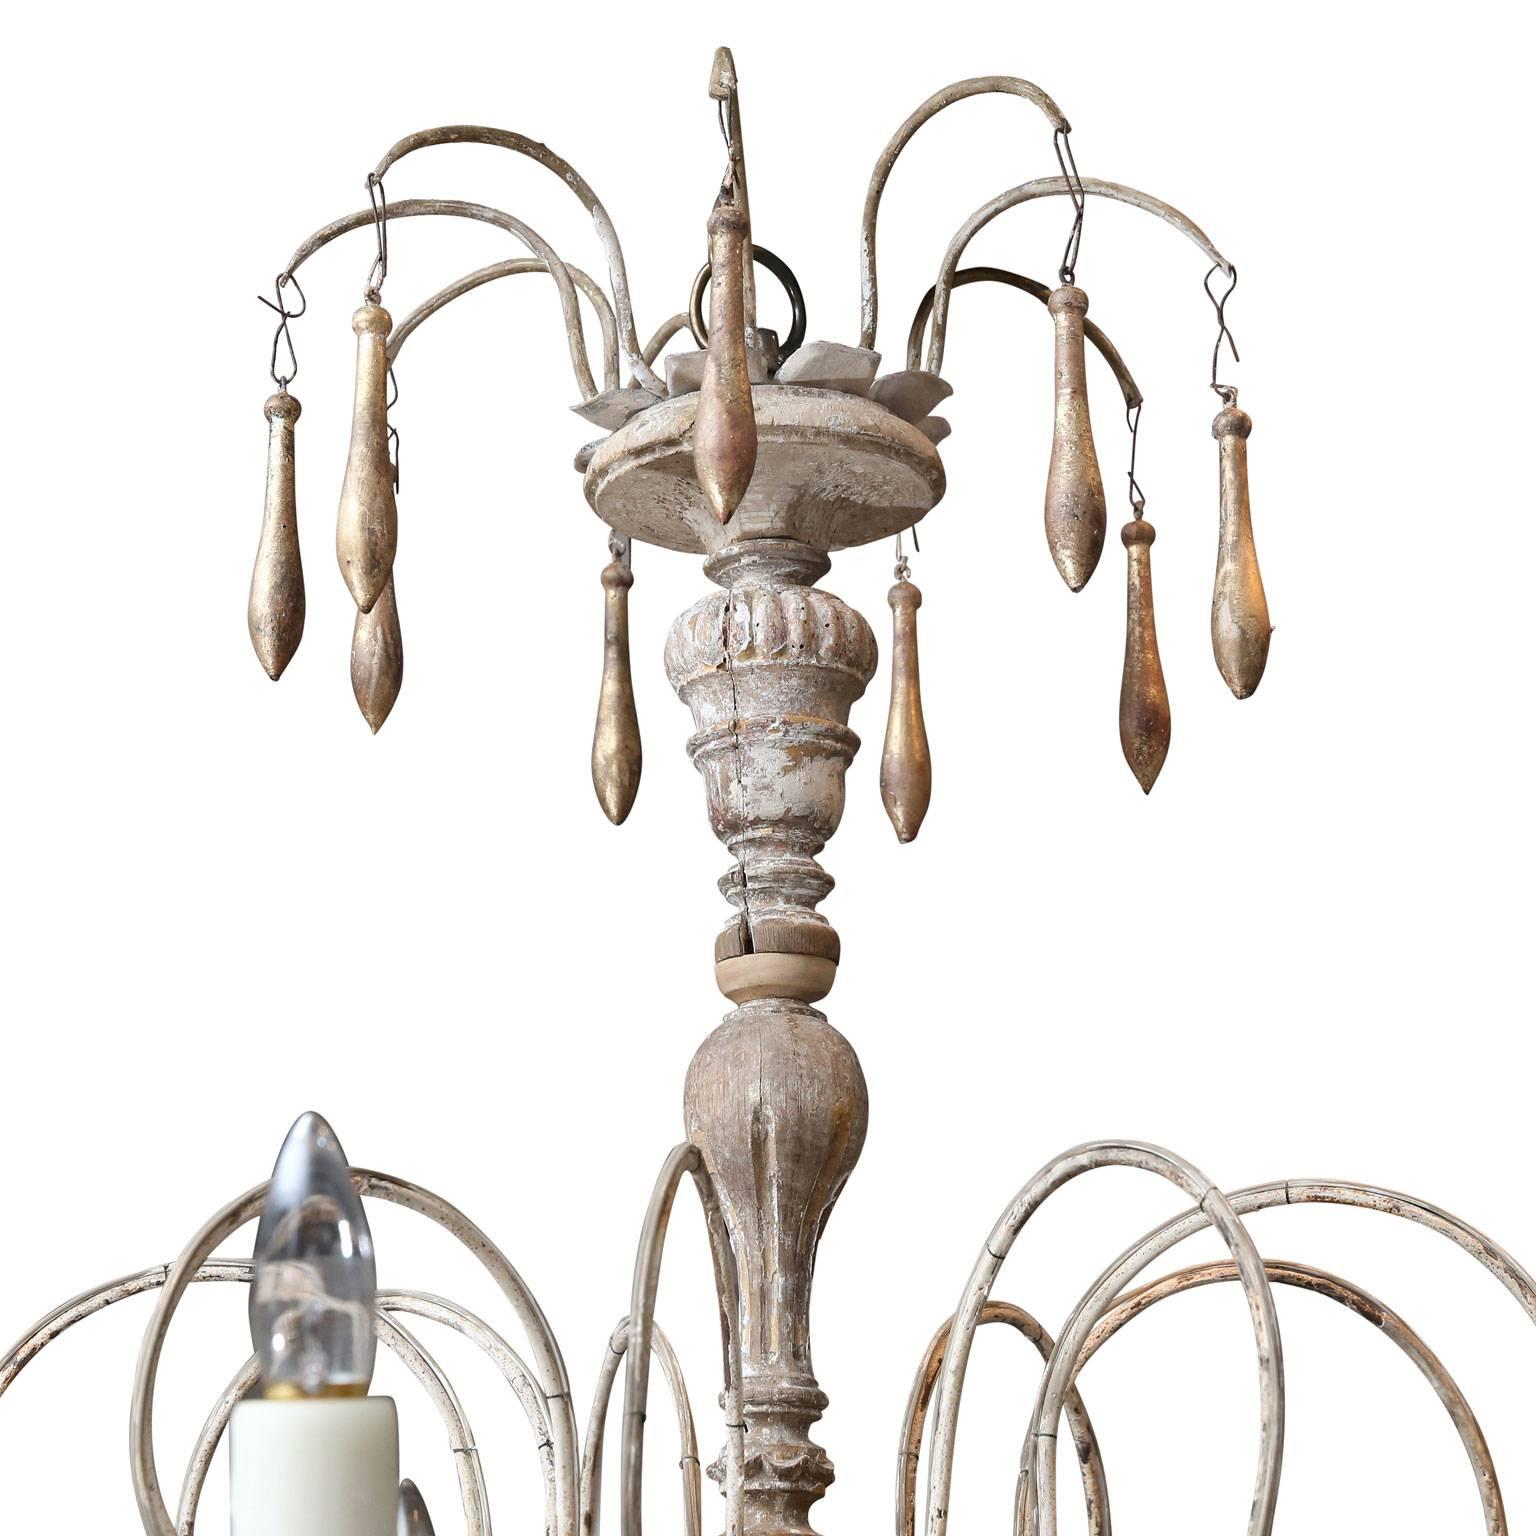 Eight-arm iron and wood chandelier, with giltwood decoration, created from 18th century French elements. Newly wired with chain and a canopy.